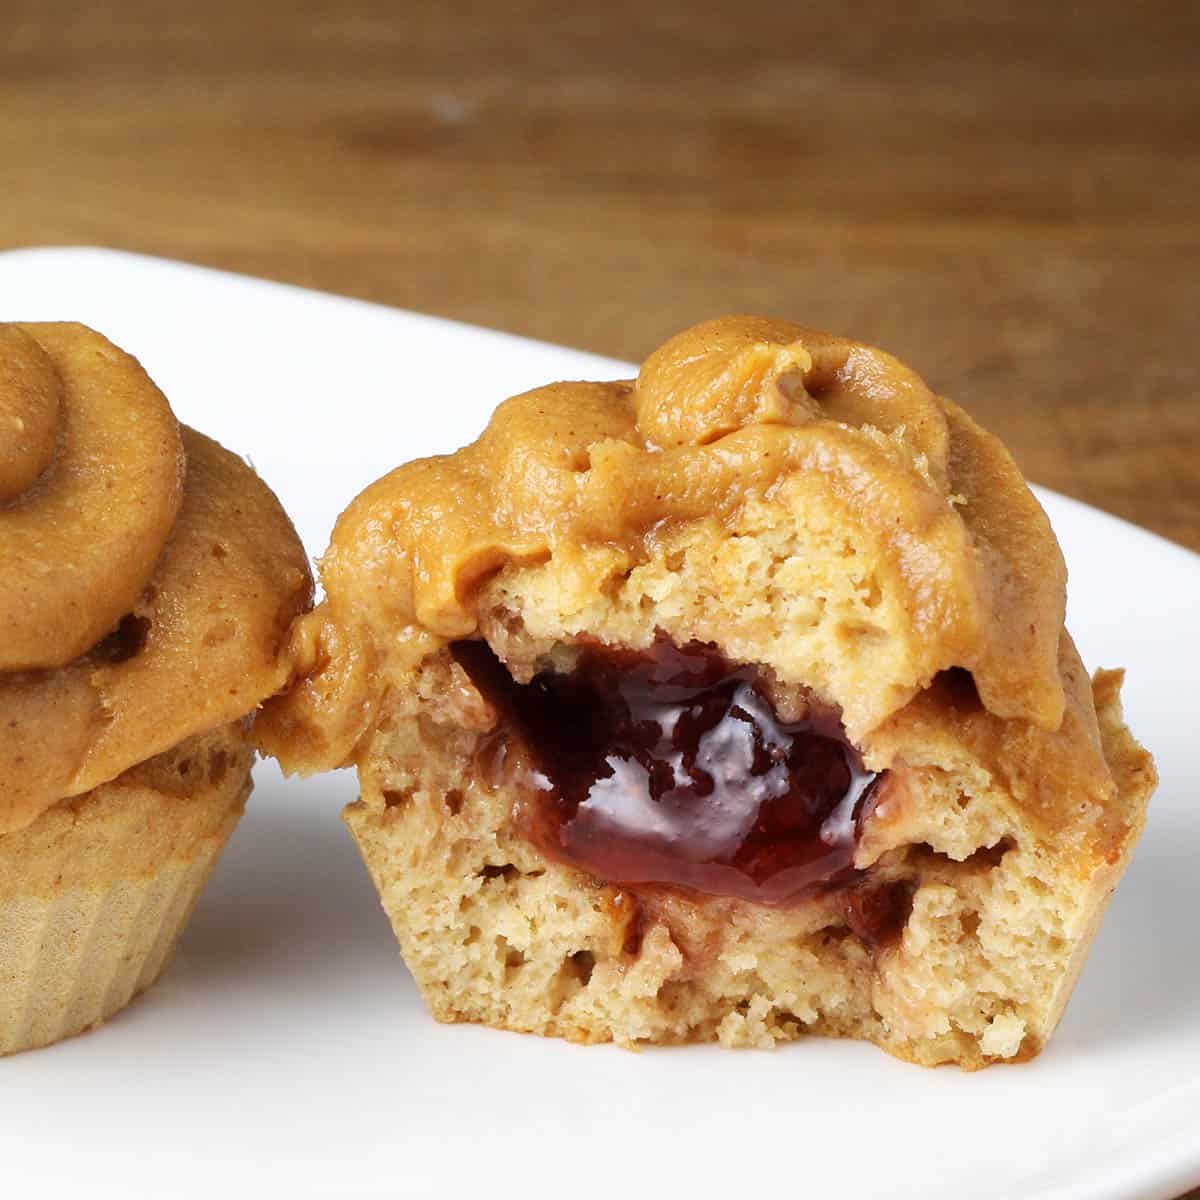 inside view of a peanut butter and jelly cupcake, which is a peanut butter cupcake filled with jelly and topped with peanut butter protein frosting on a white plate on a wood table